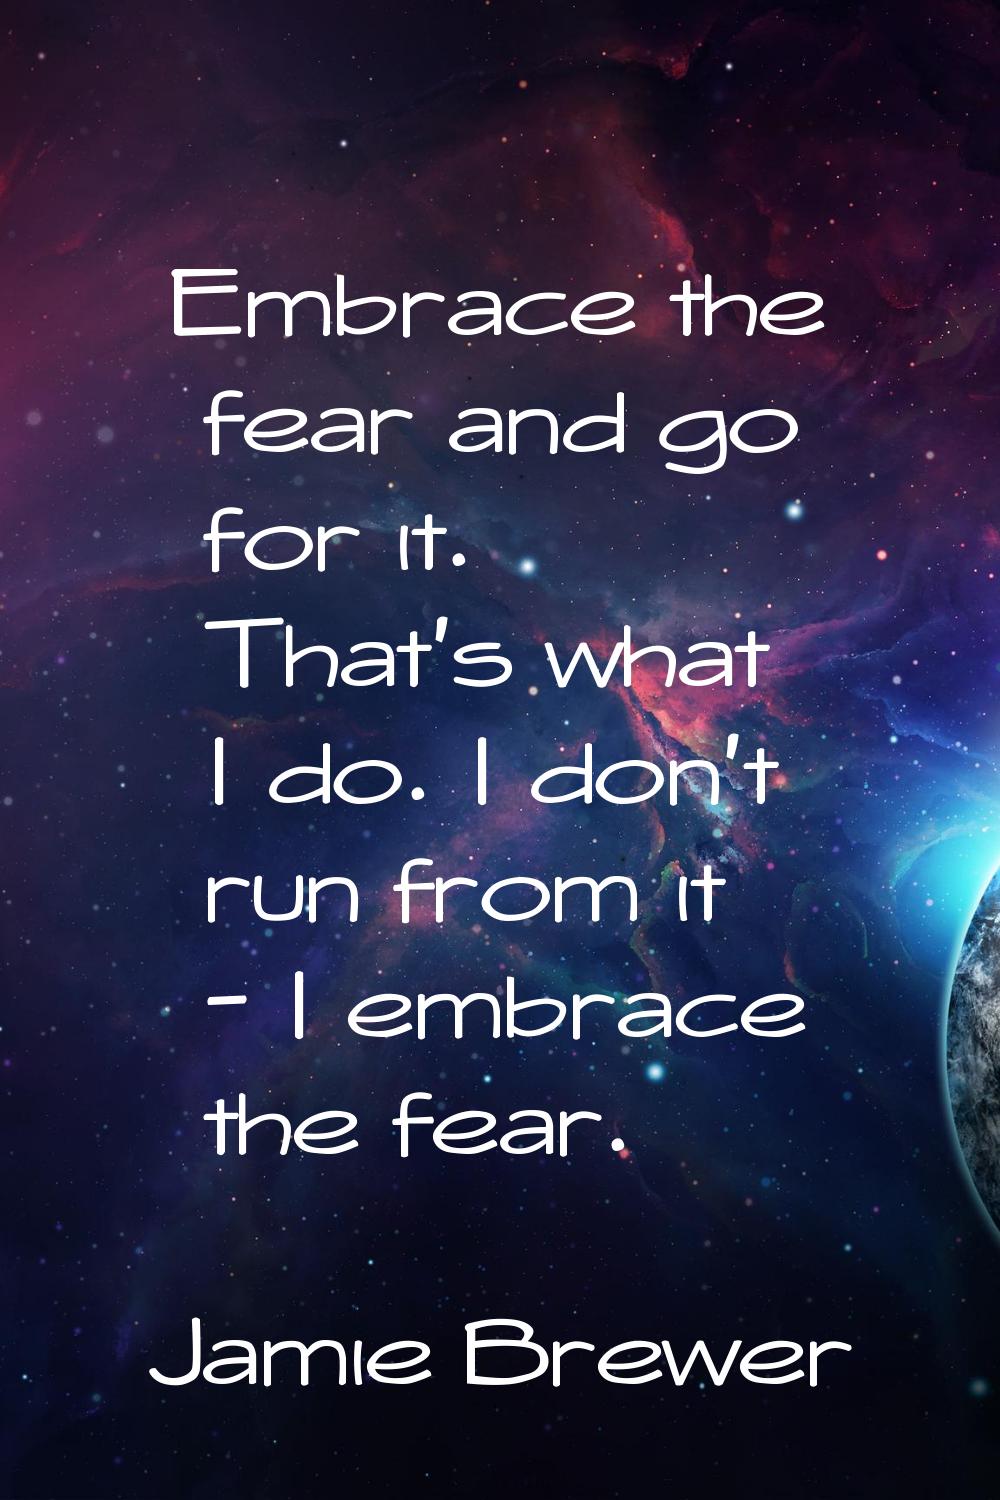 Embrace the fear and go for it. That's what I do. I don't run from it - I embrace the fear.